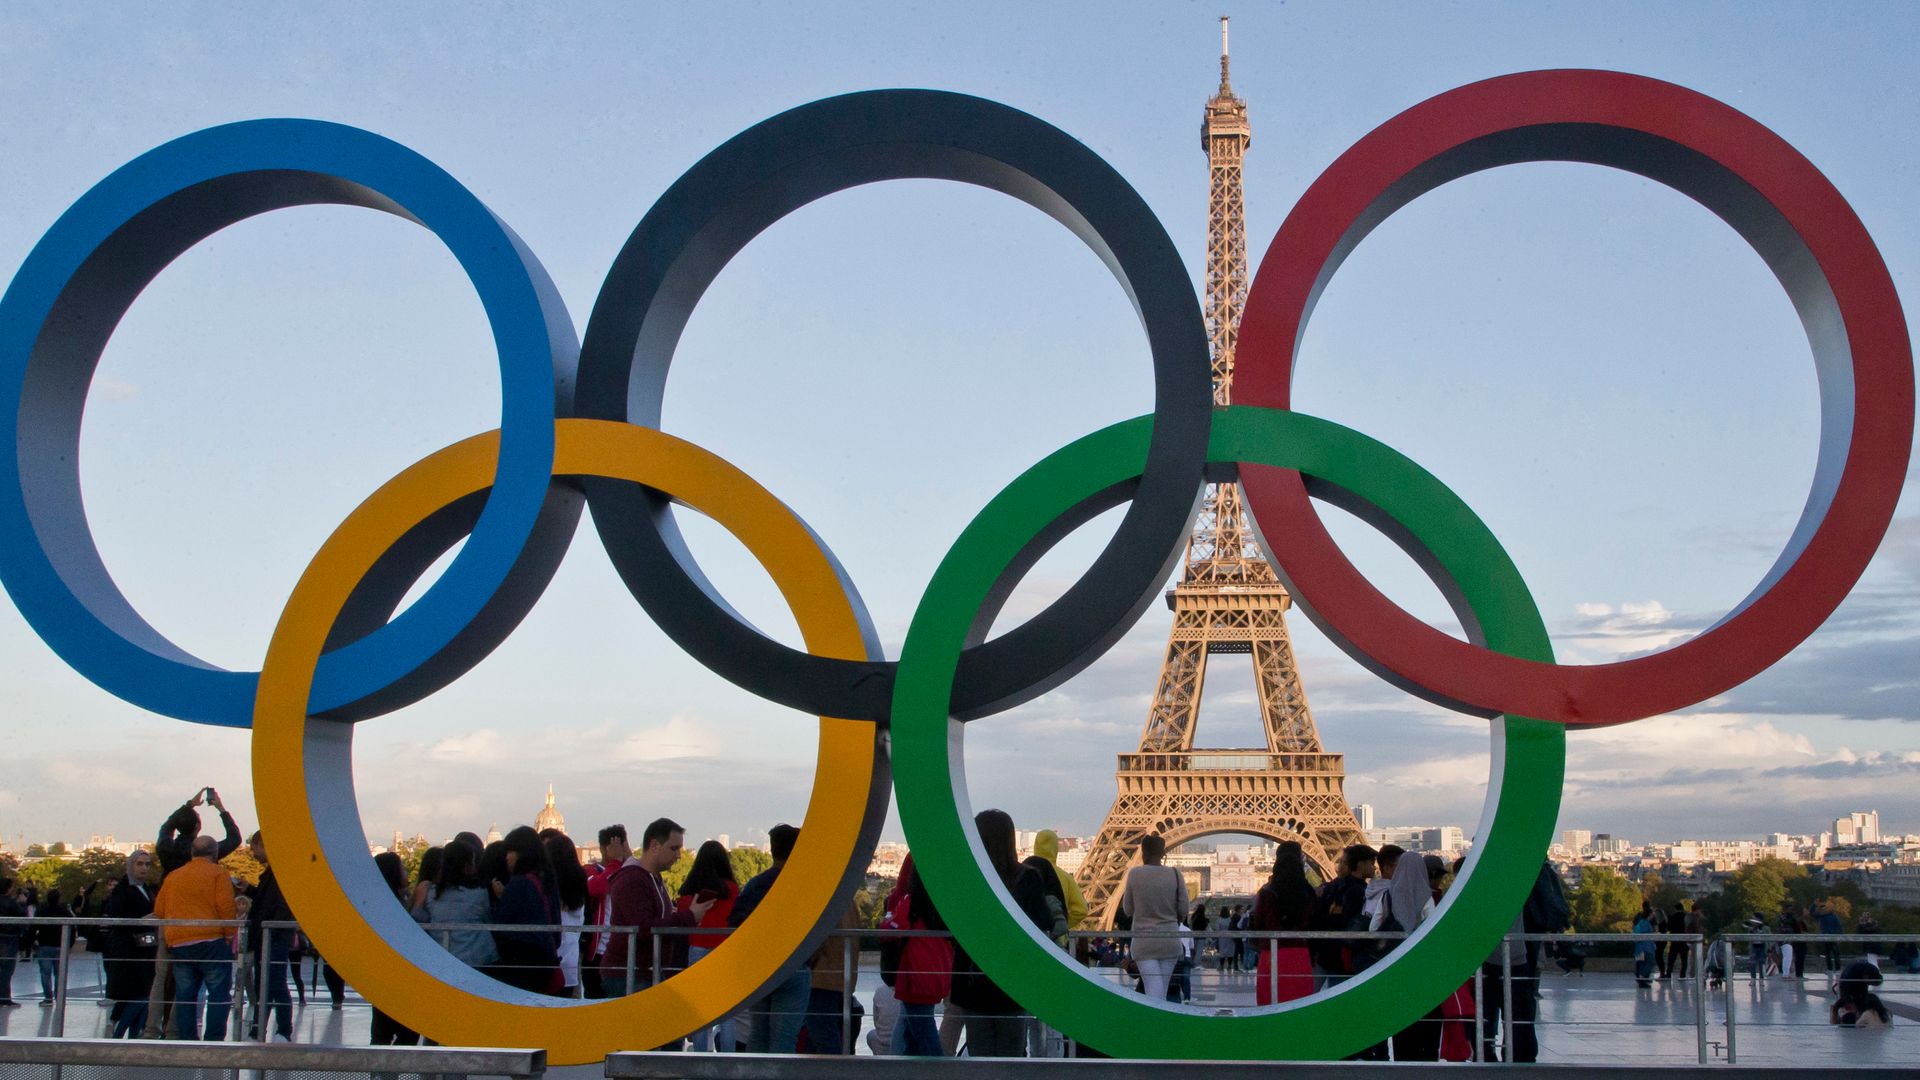 Paris 2024 Olympics: 100 days to go - who's tipped to win most medals?